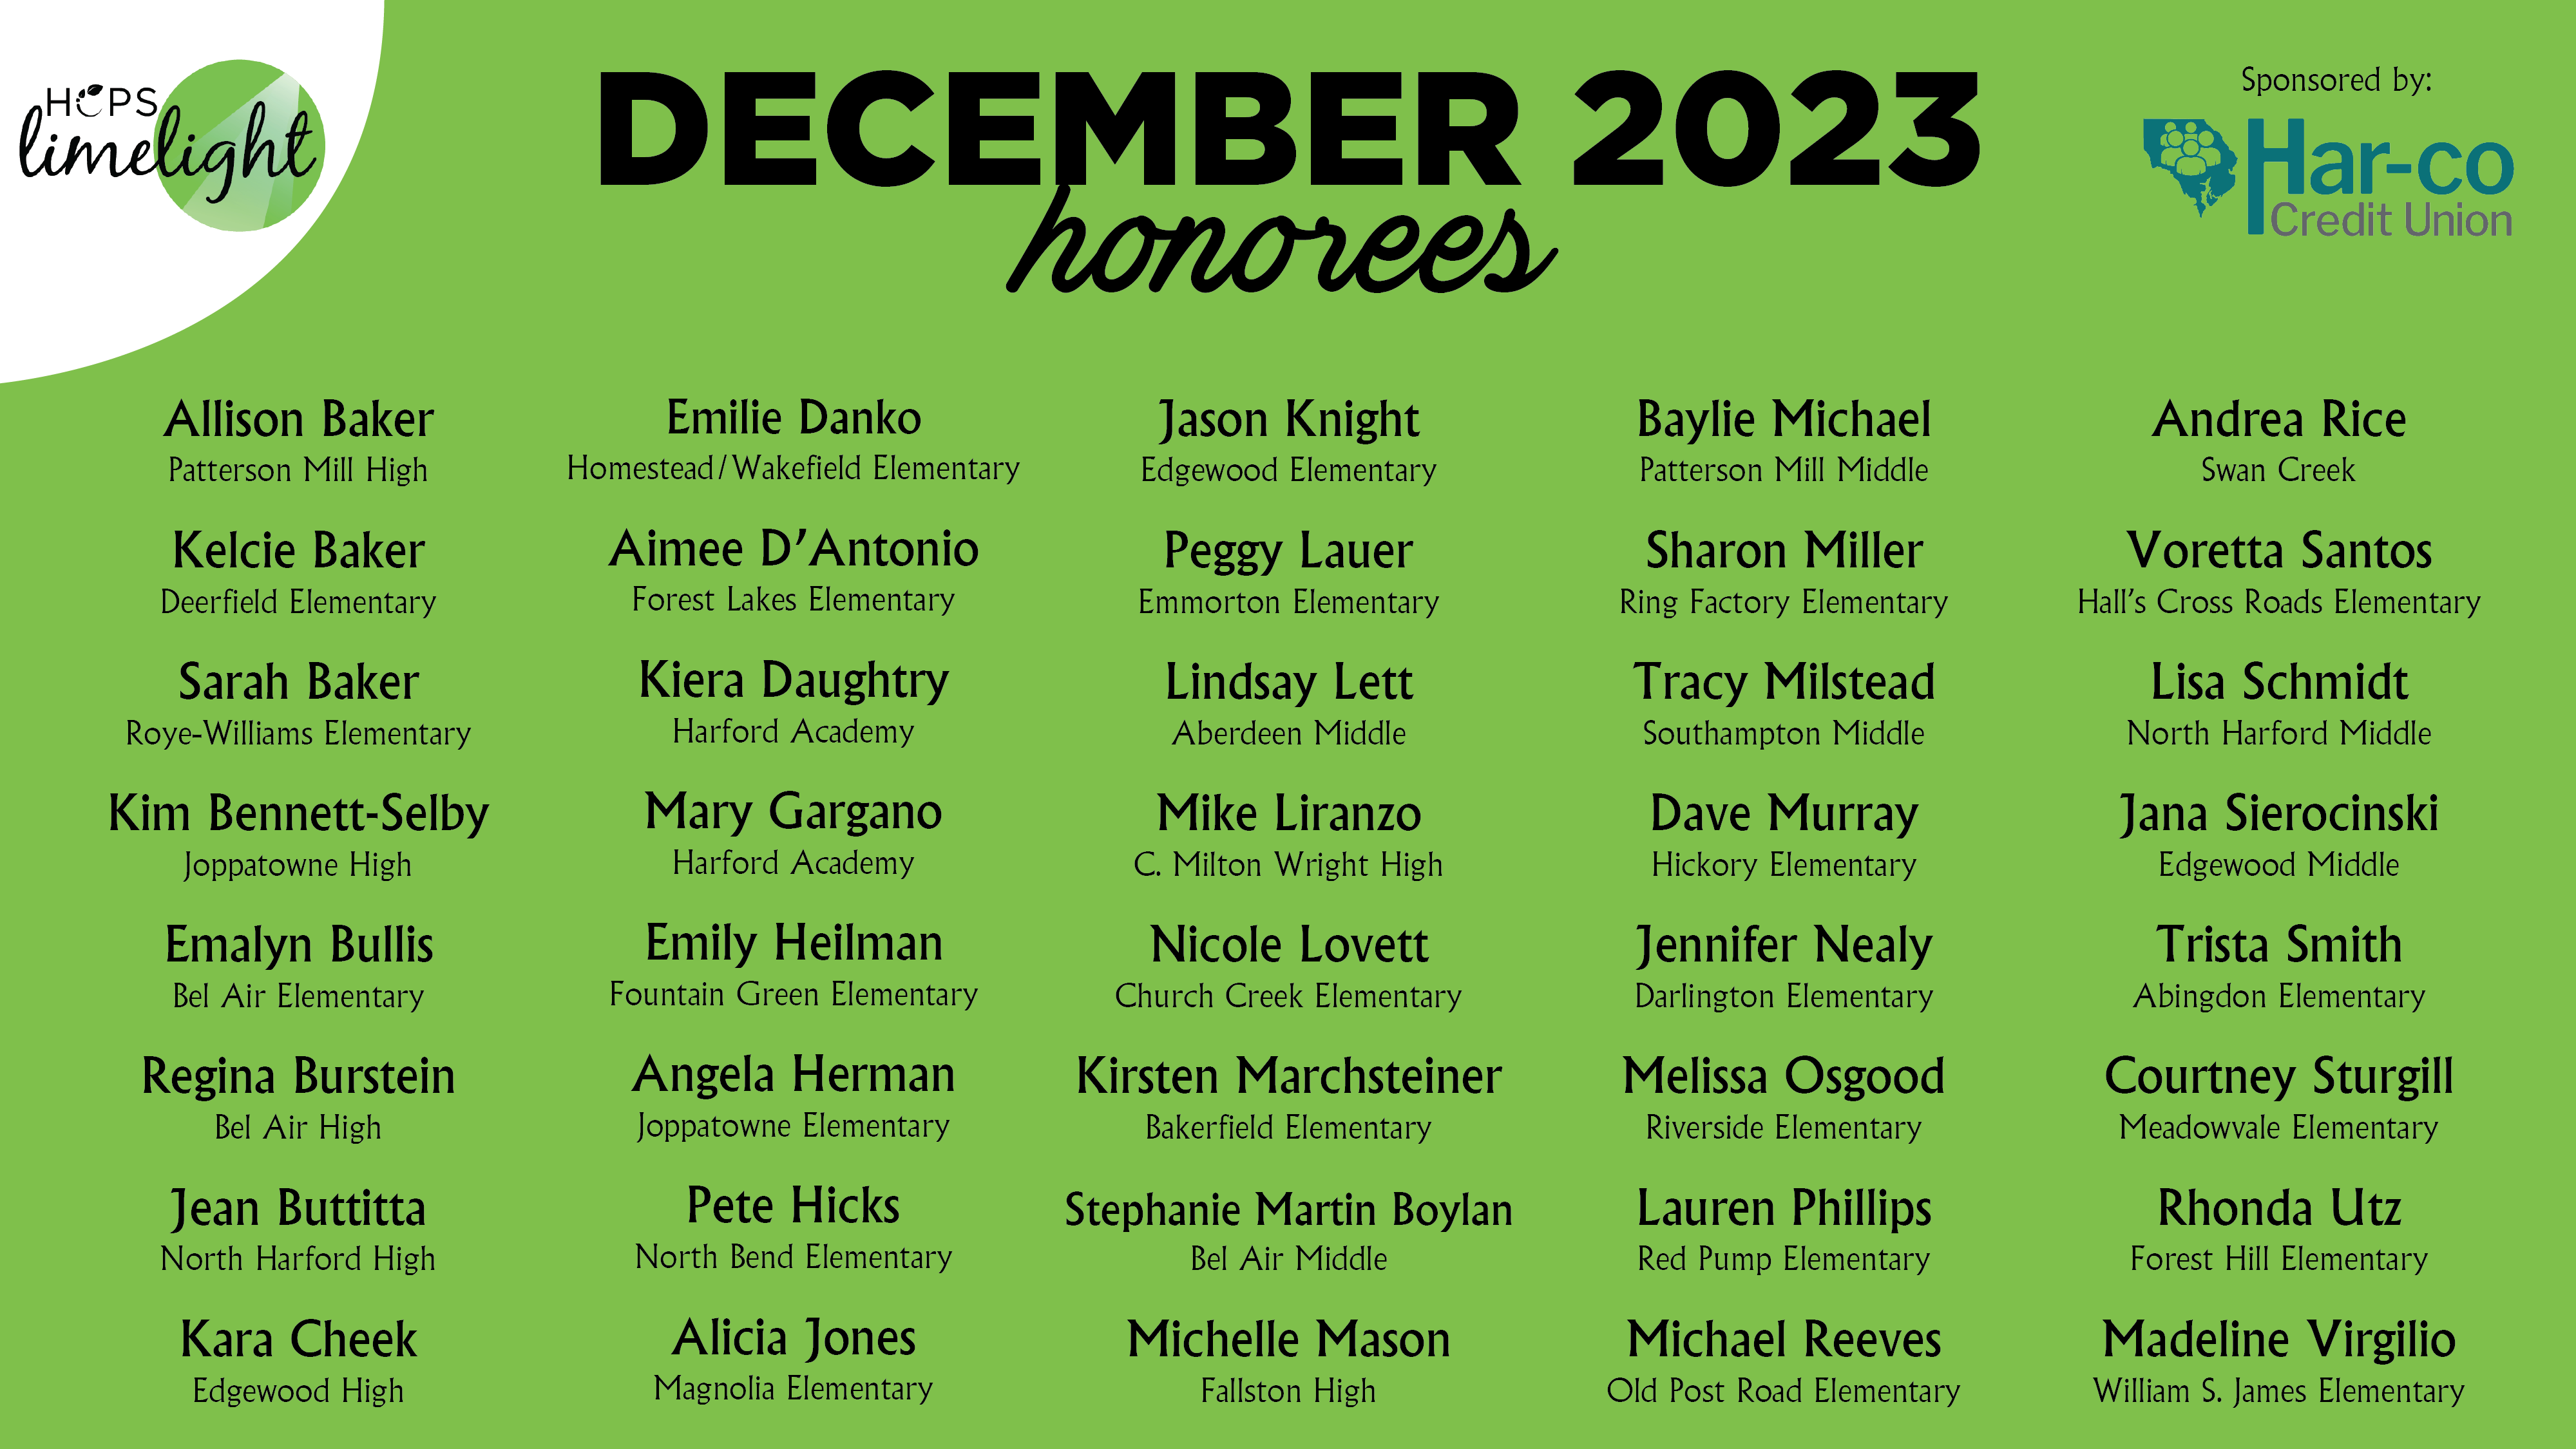 HCPS Limelight Honorees - December 2023